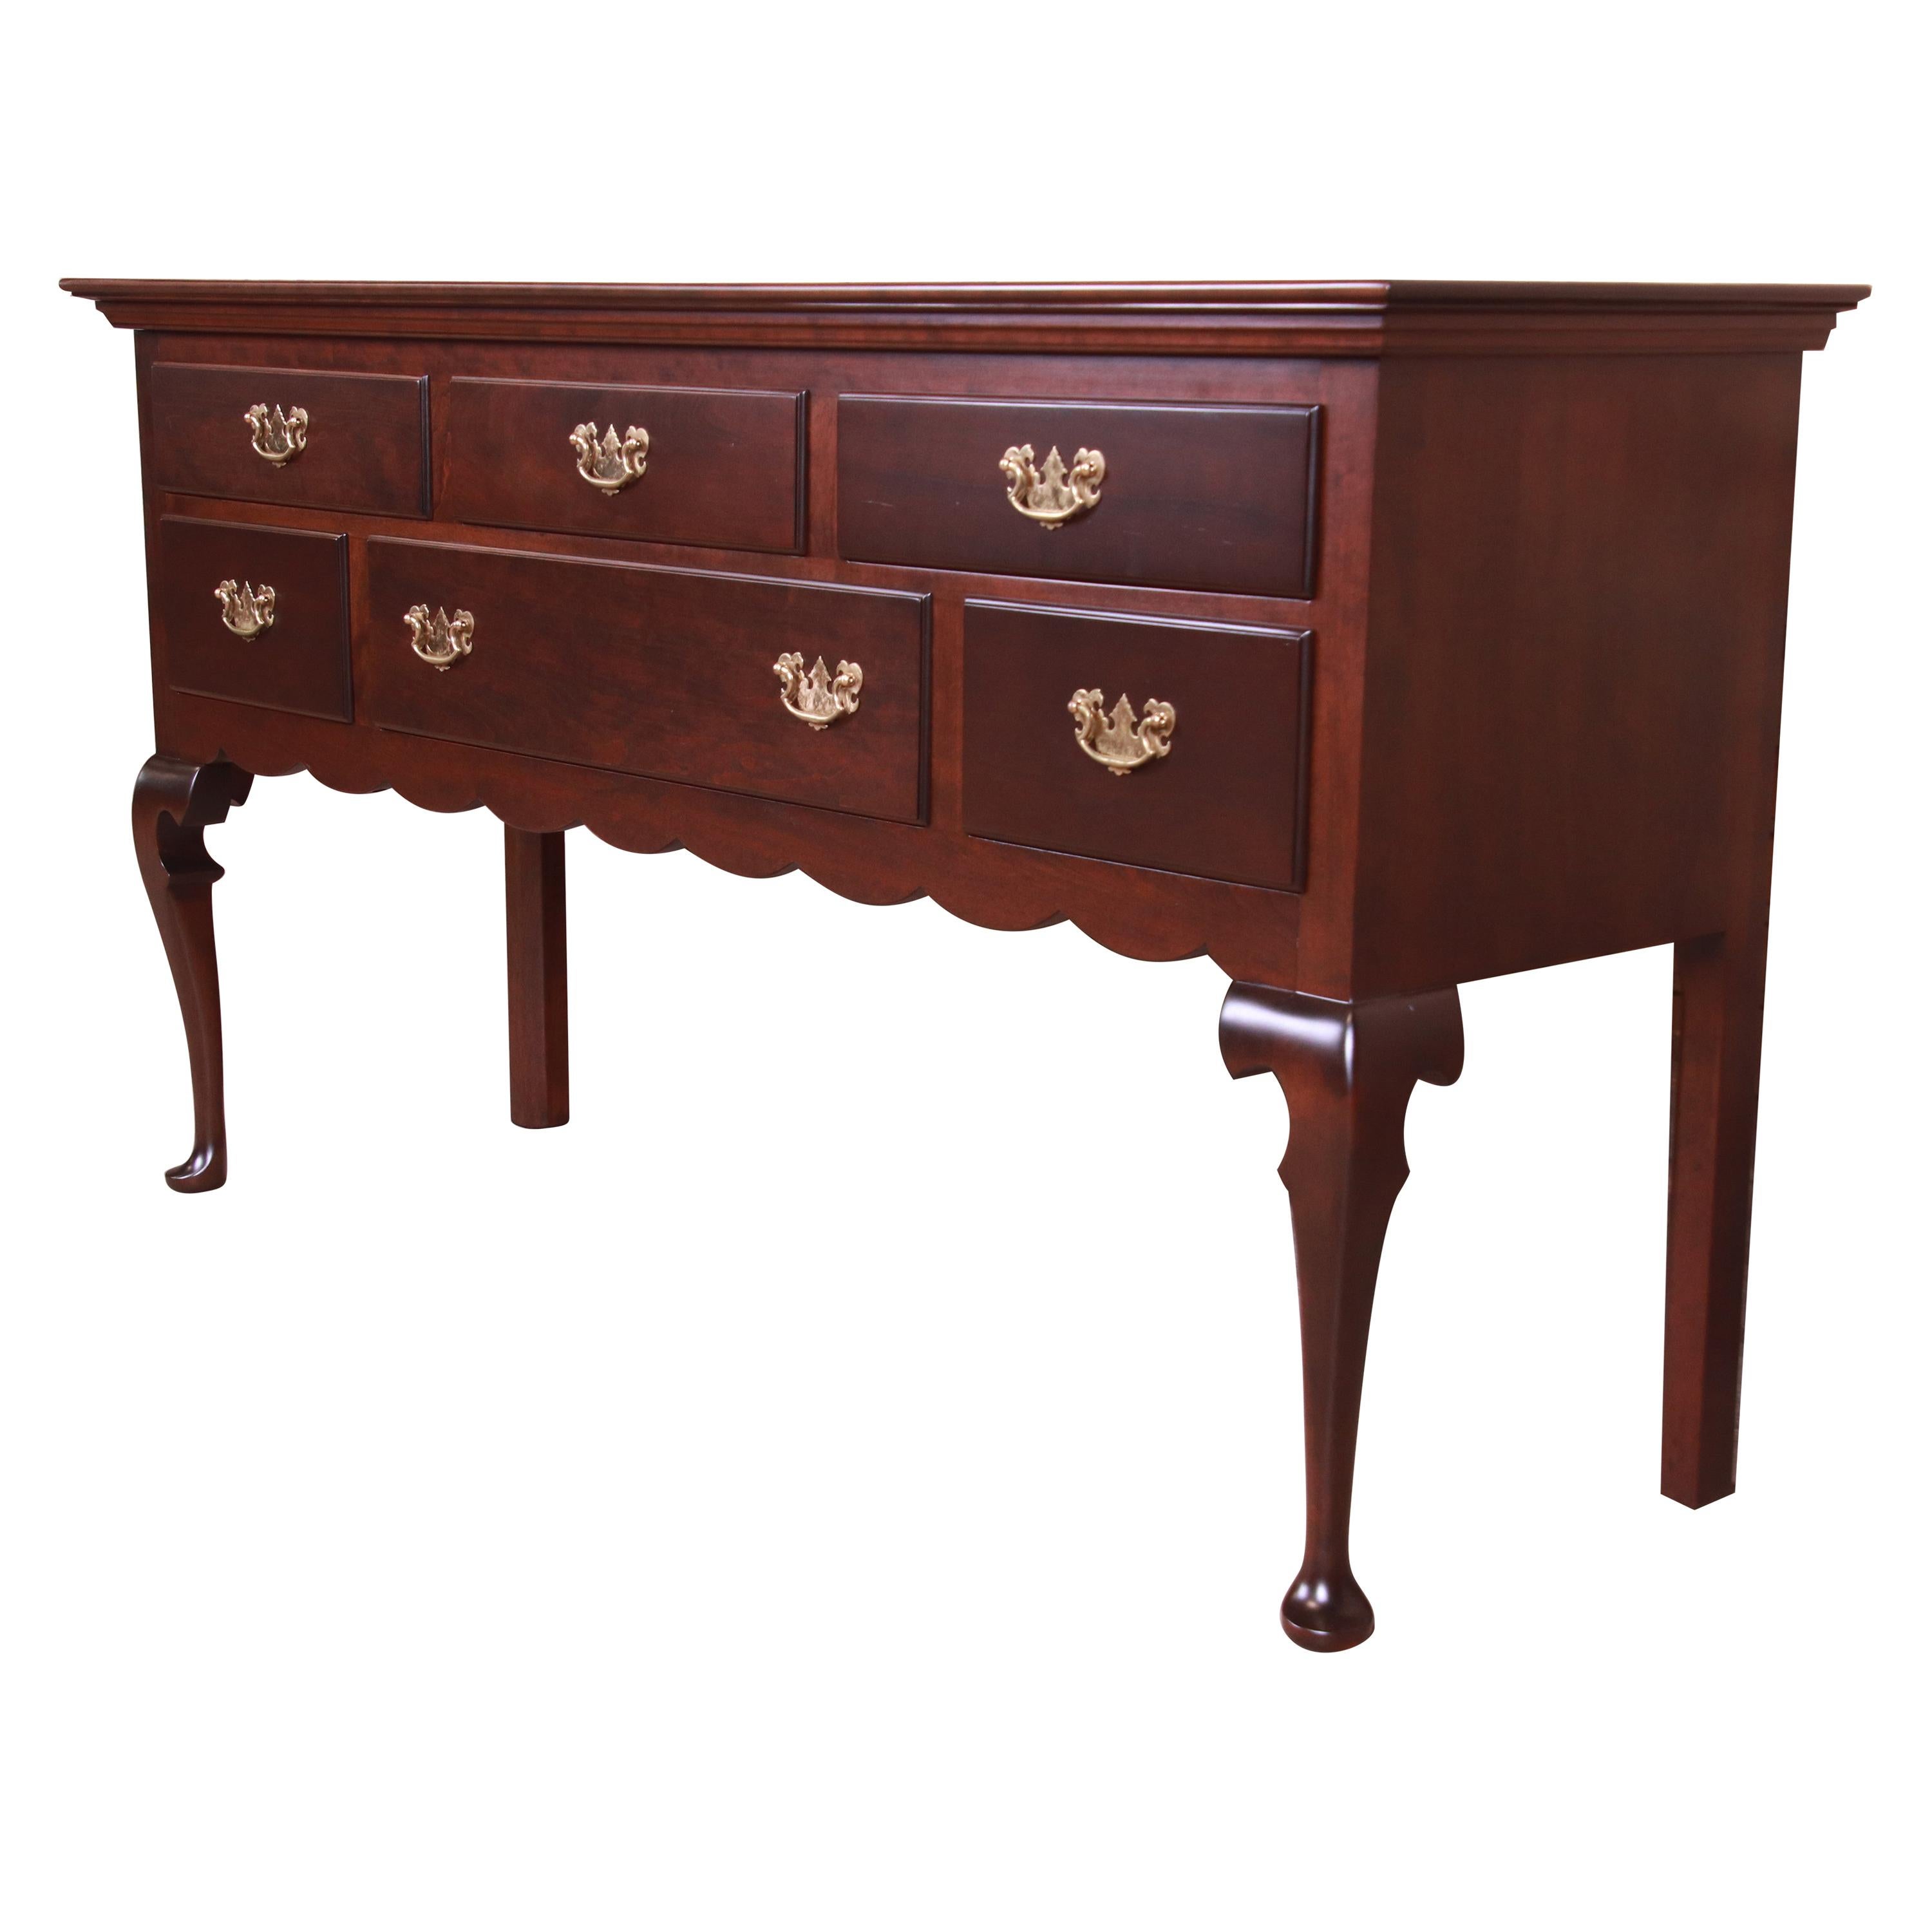 Stickley Queen Anne Solid Cherry Wood Sideboard Credenza, Newly Refinished For Sale